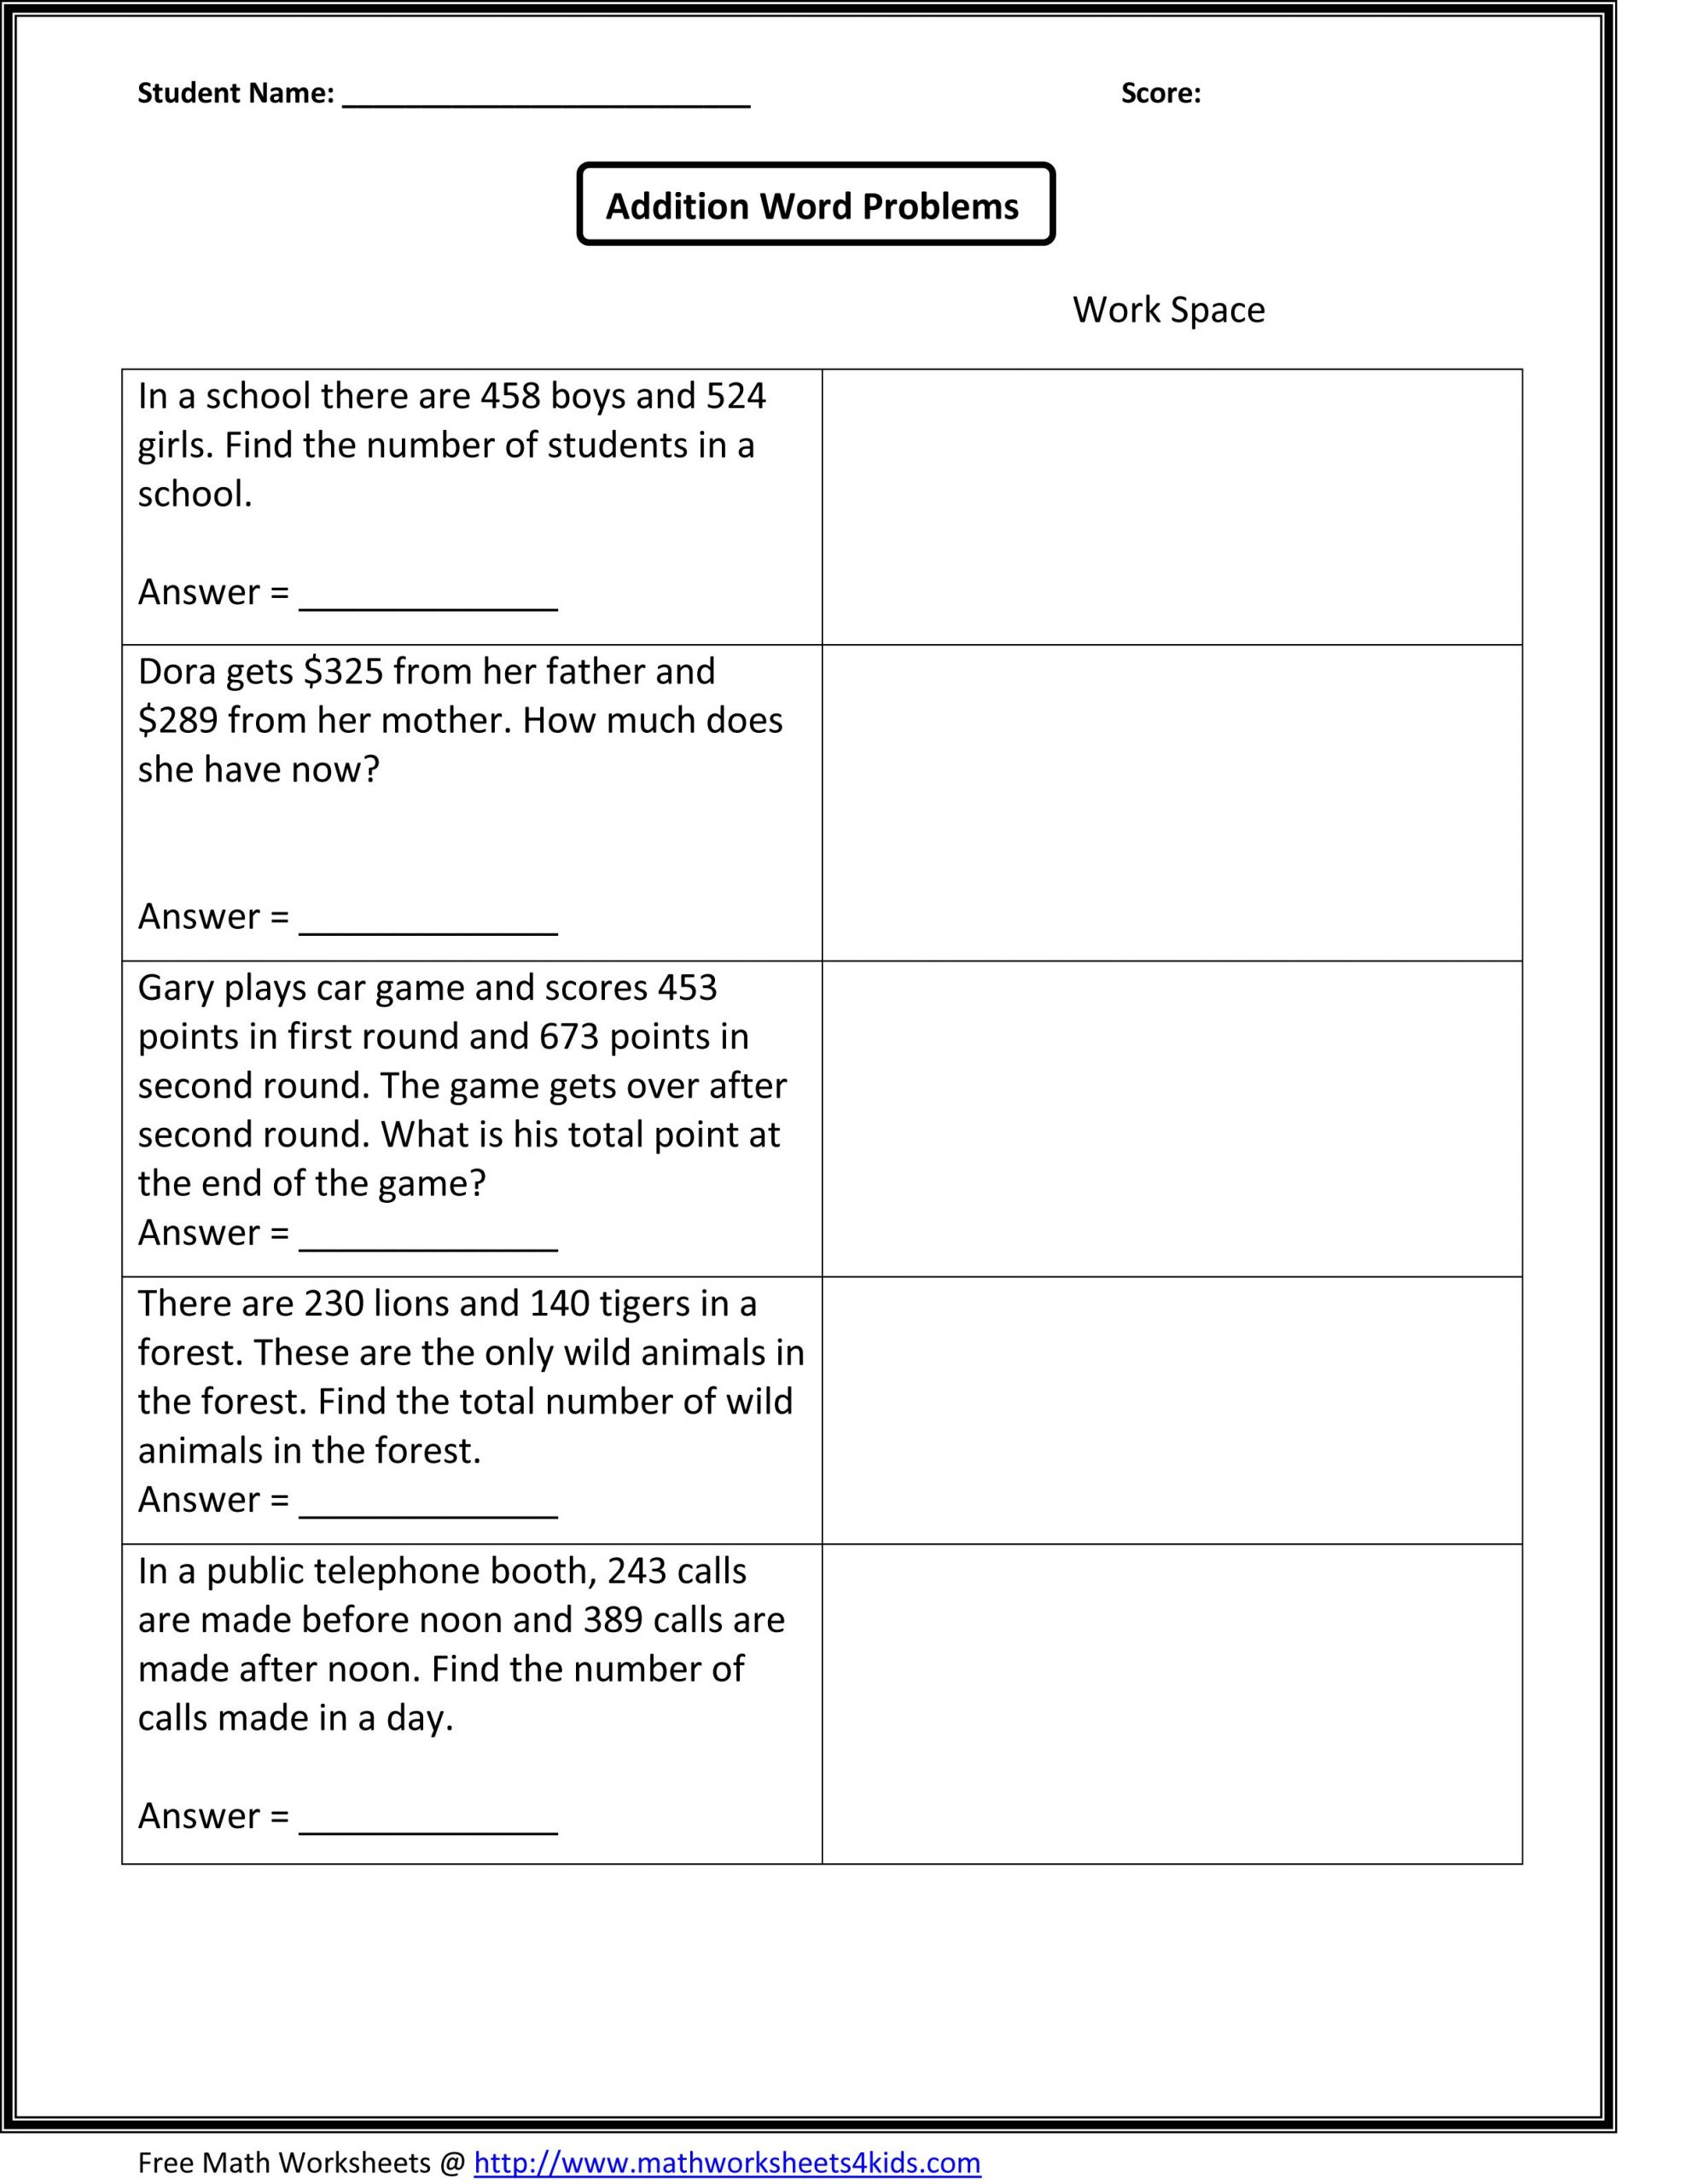 Free Math Worksheets Second Grade 2 Subtraction Subtract whole Tens From 3 Digit Numbers